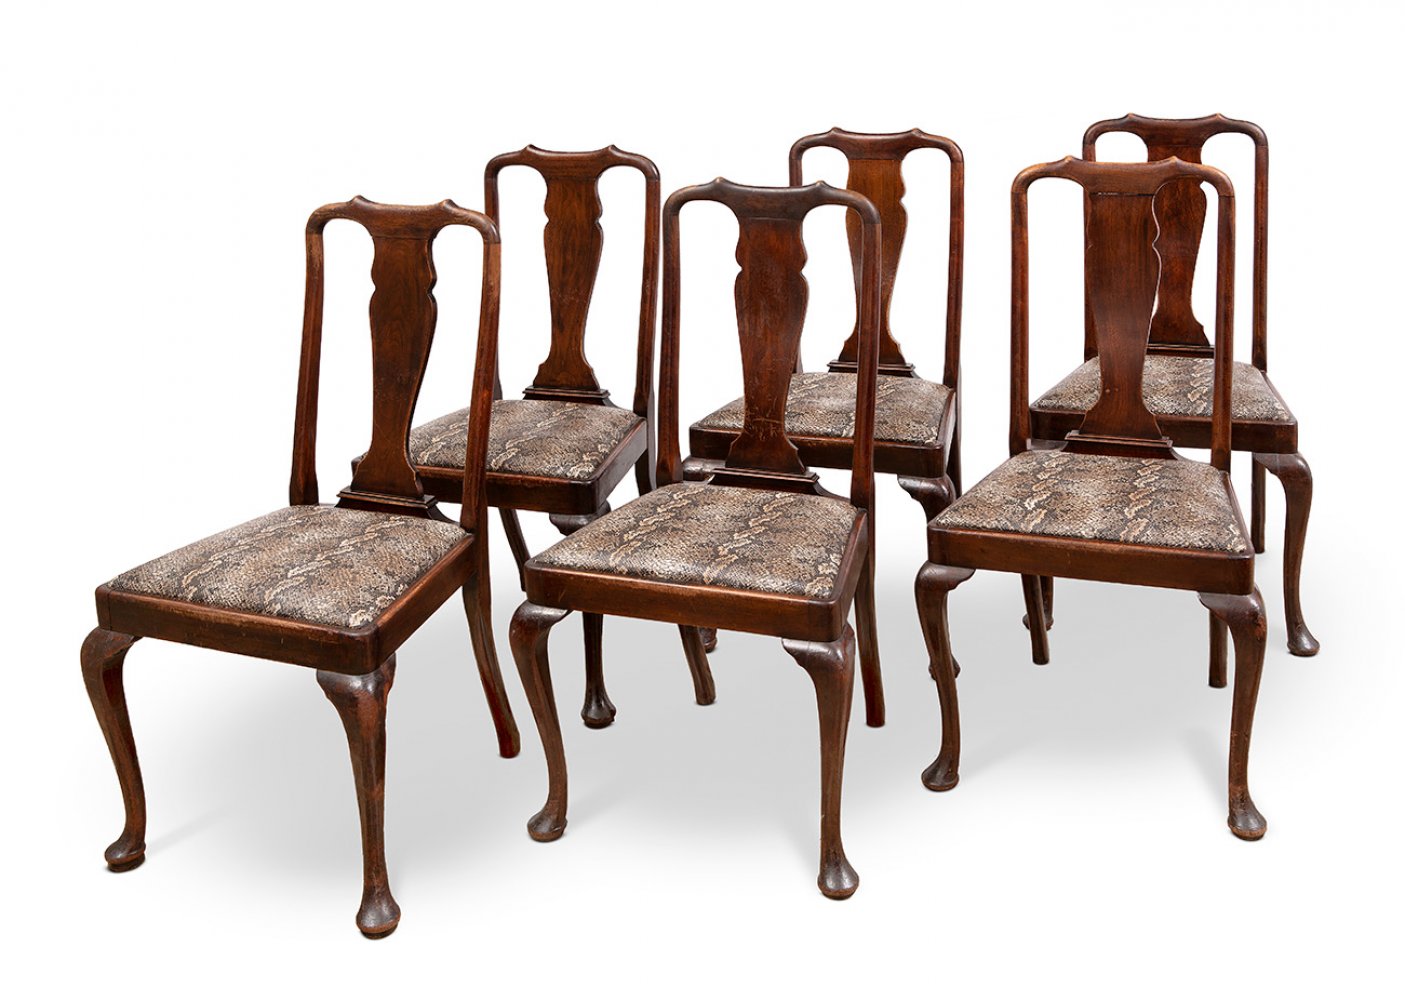 Six American Chippendale style dining table chairs, 19th century.Mahogany wood. Imitation boa skin